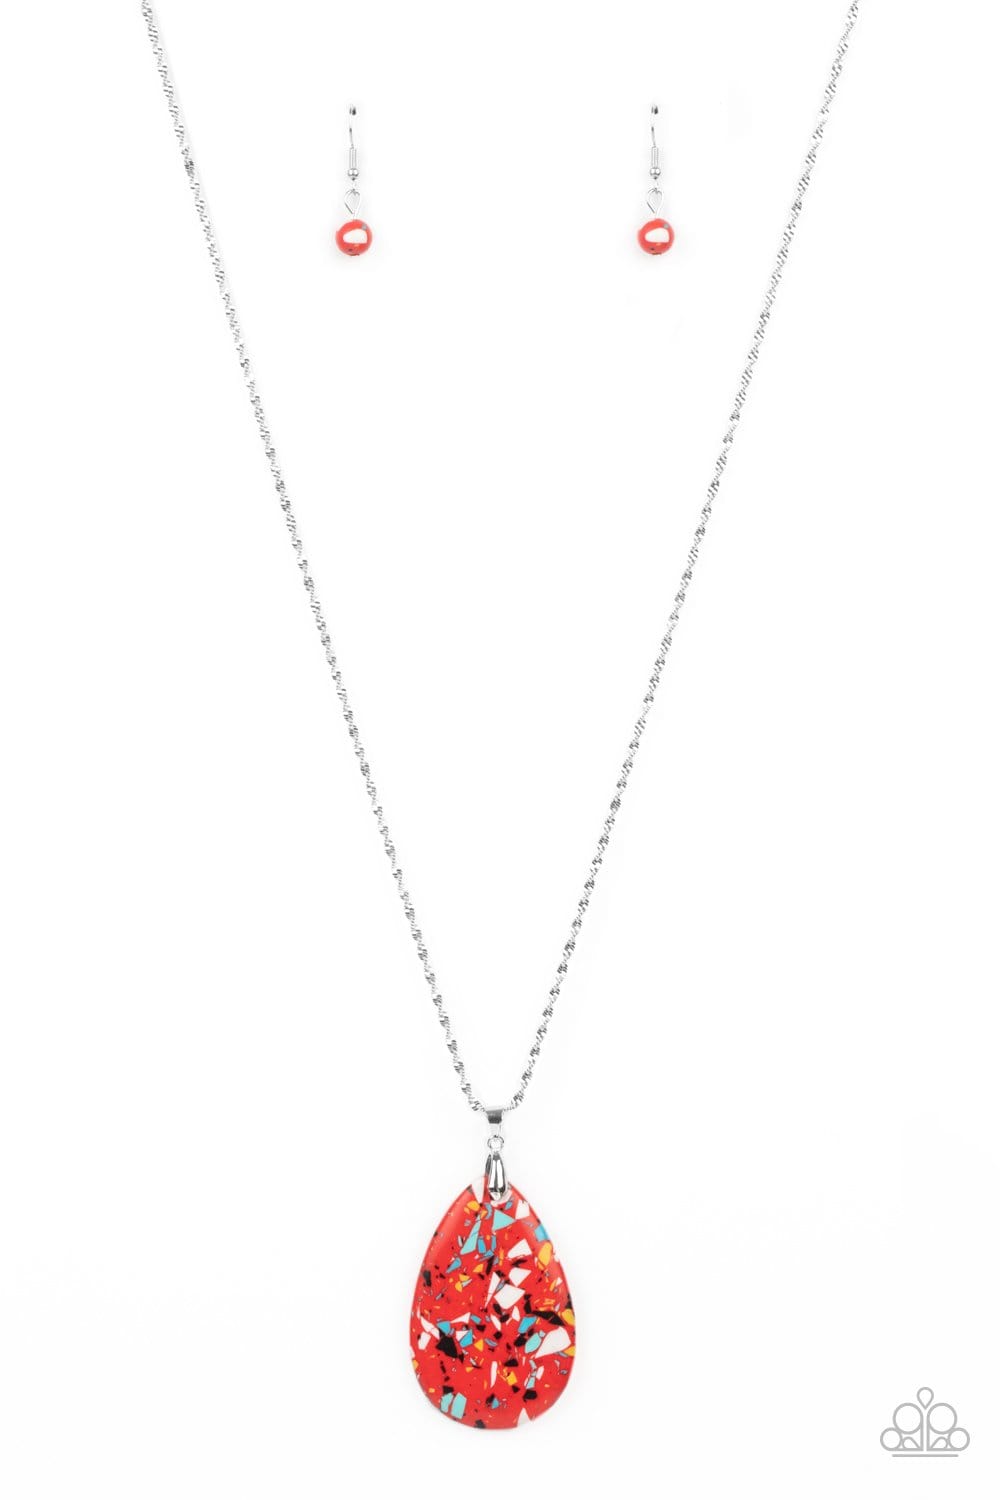 (Coming Soon) Extra Elemental - Red - Paparazzi Jewelry